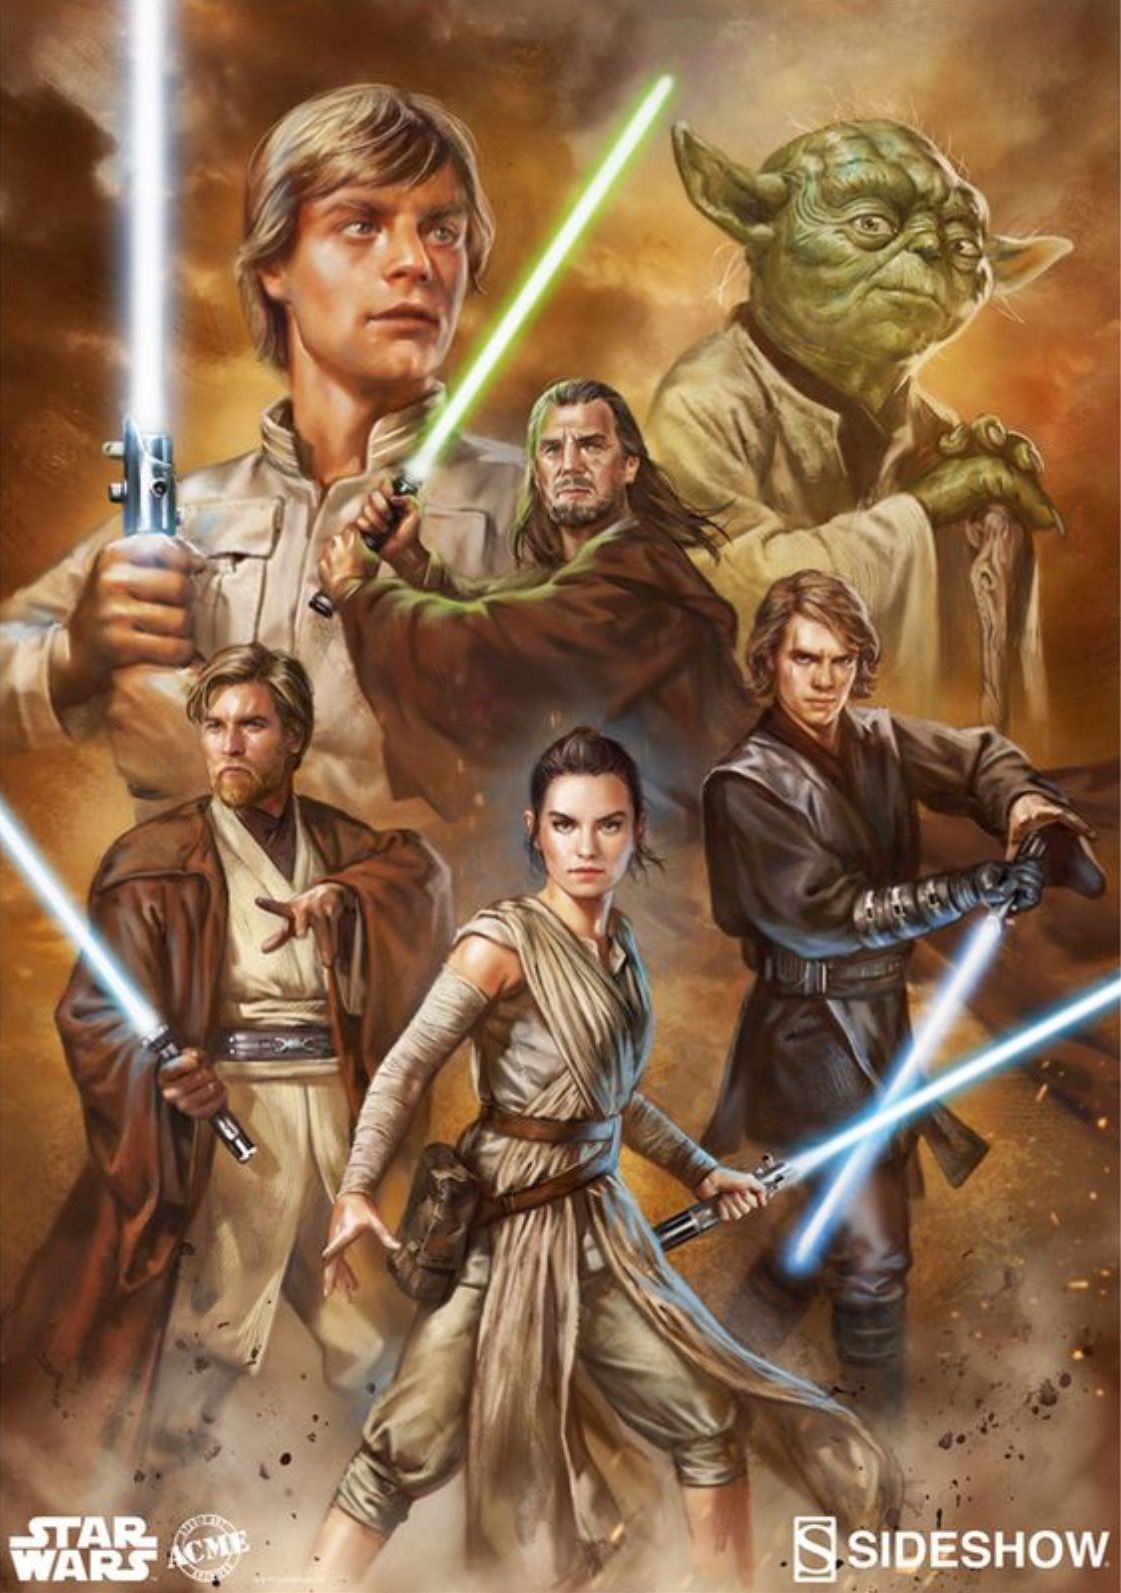 The Jedi Print by Sideshow Collectibles. Star wars art, Star wars poster, Star wars image